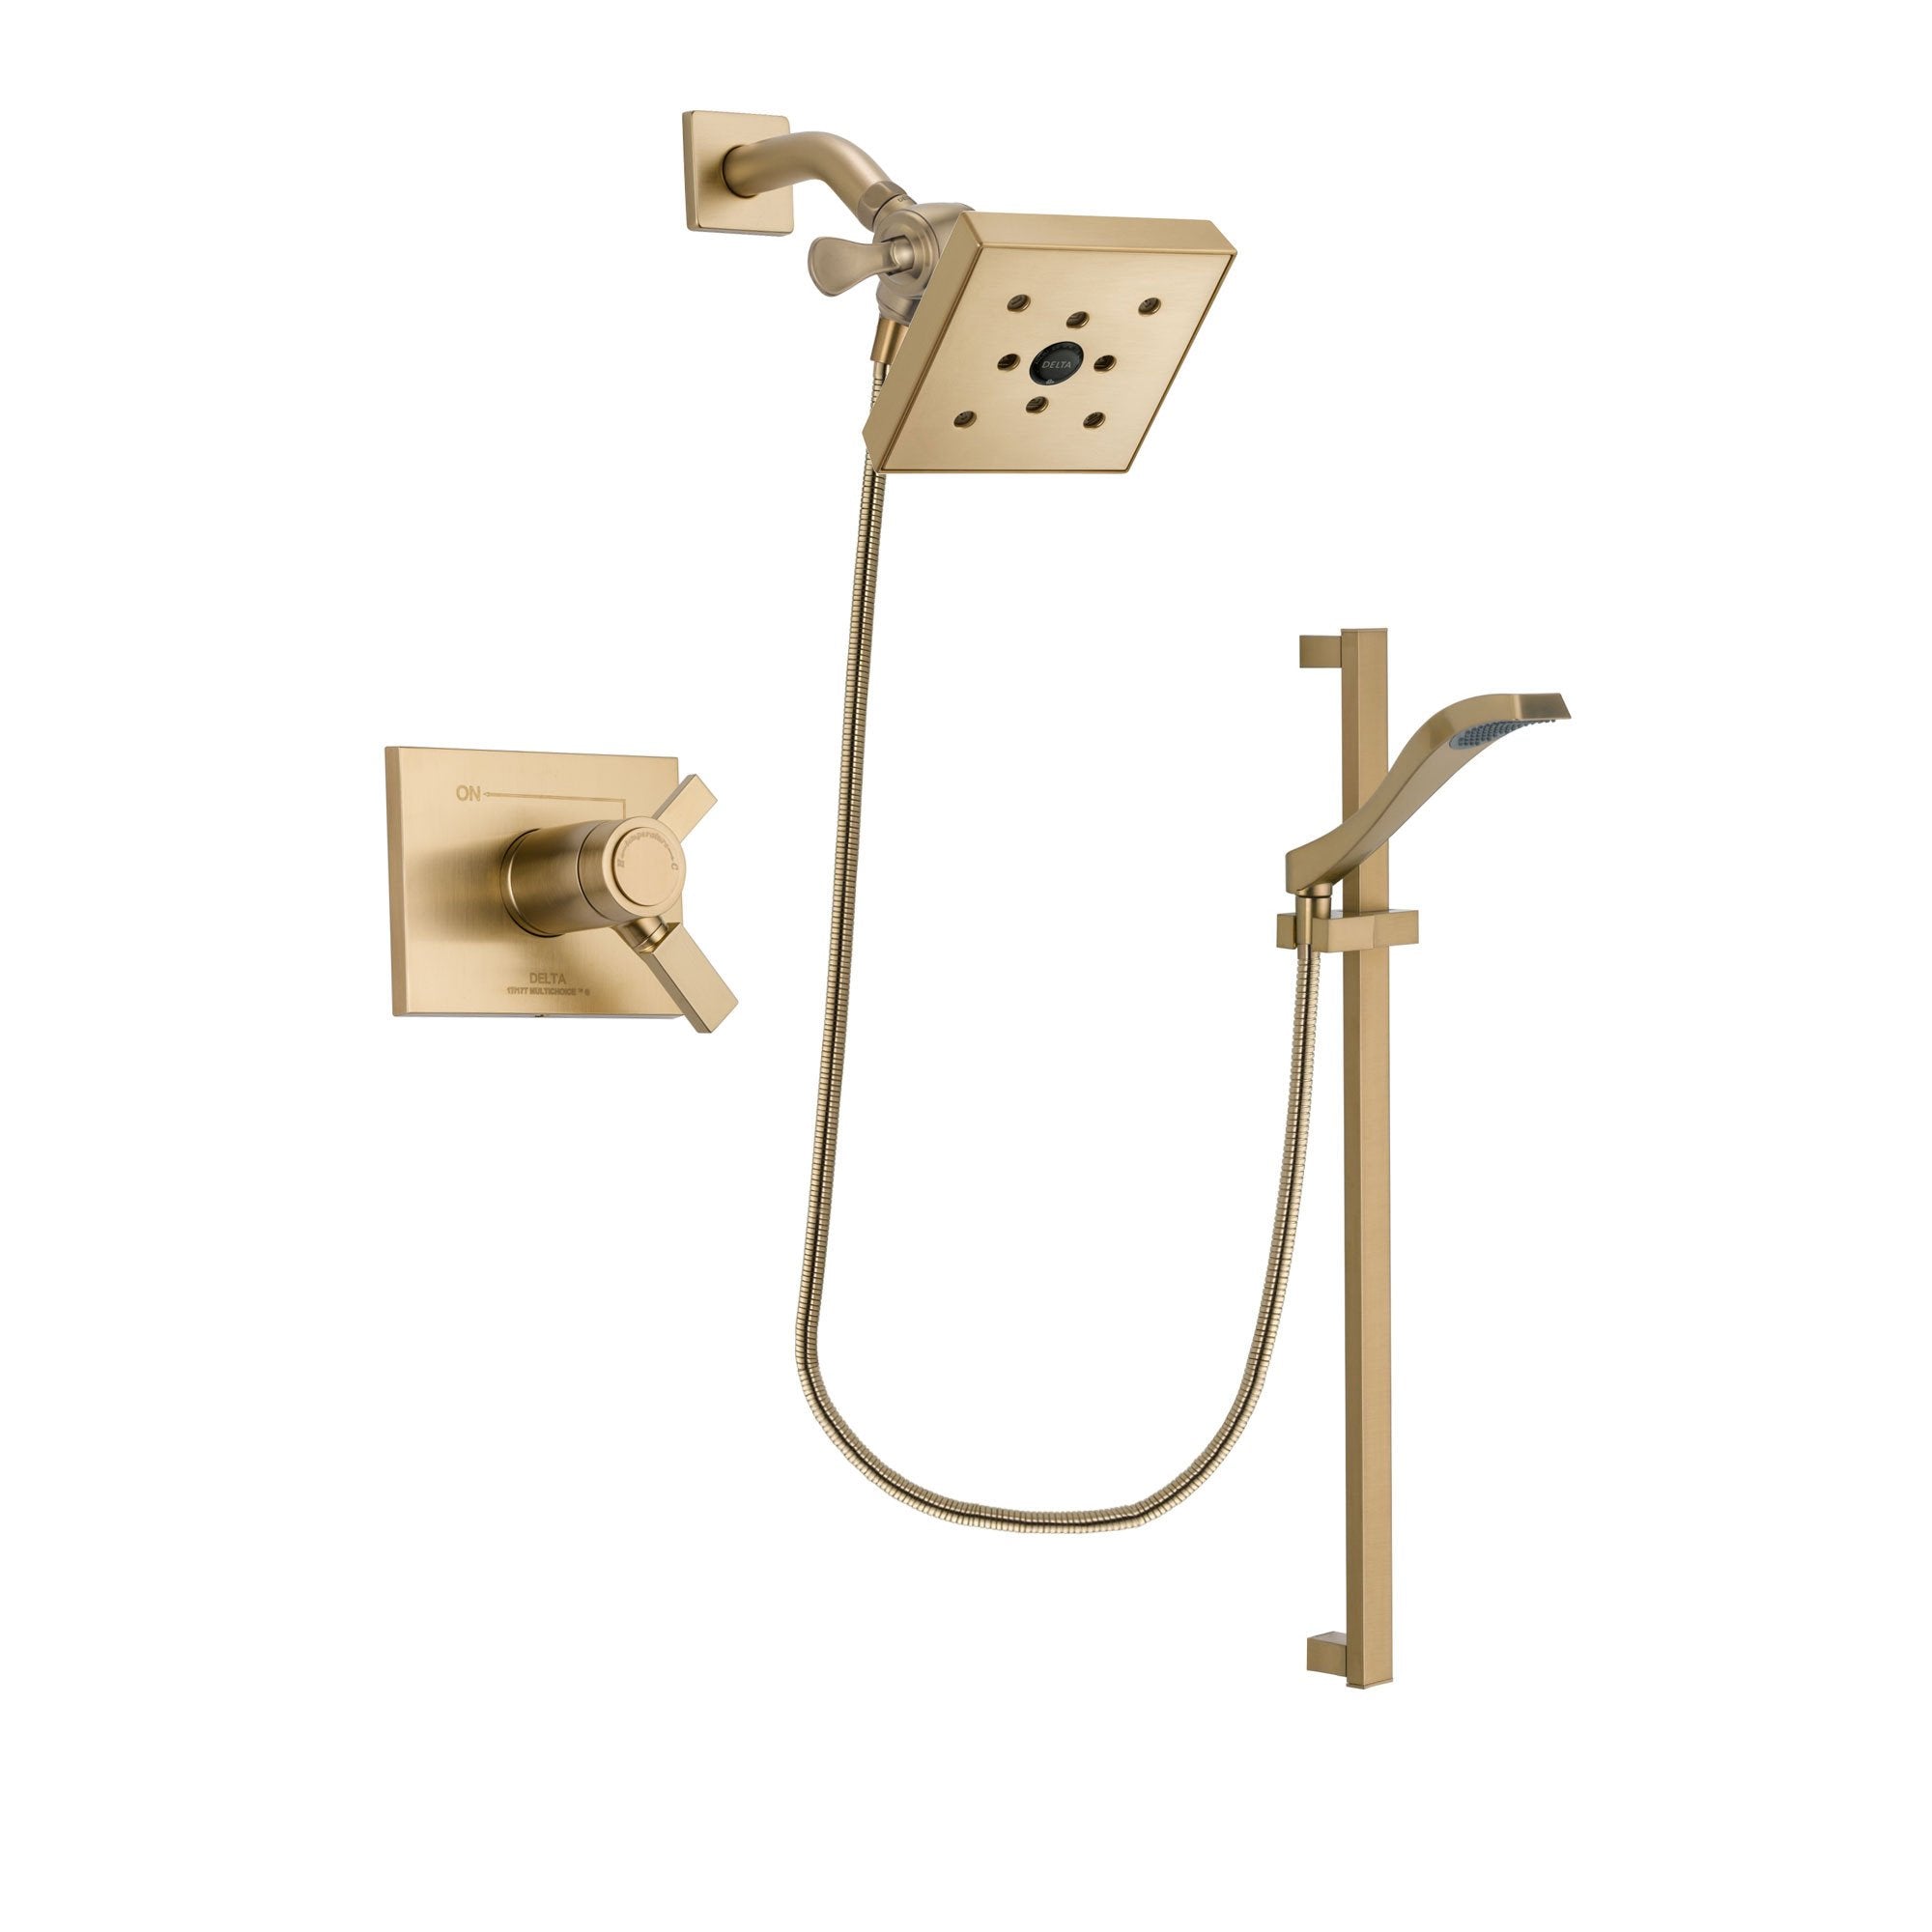 Delta Vero Champagne Bronze Finish Thermostatic Shower Faucet System Package with Square Shower Head and Modern Handheld Shower Spray with Slide Bar Includes Rough-in Valve DSP3936V